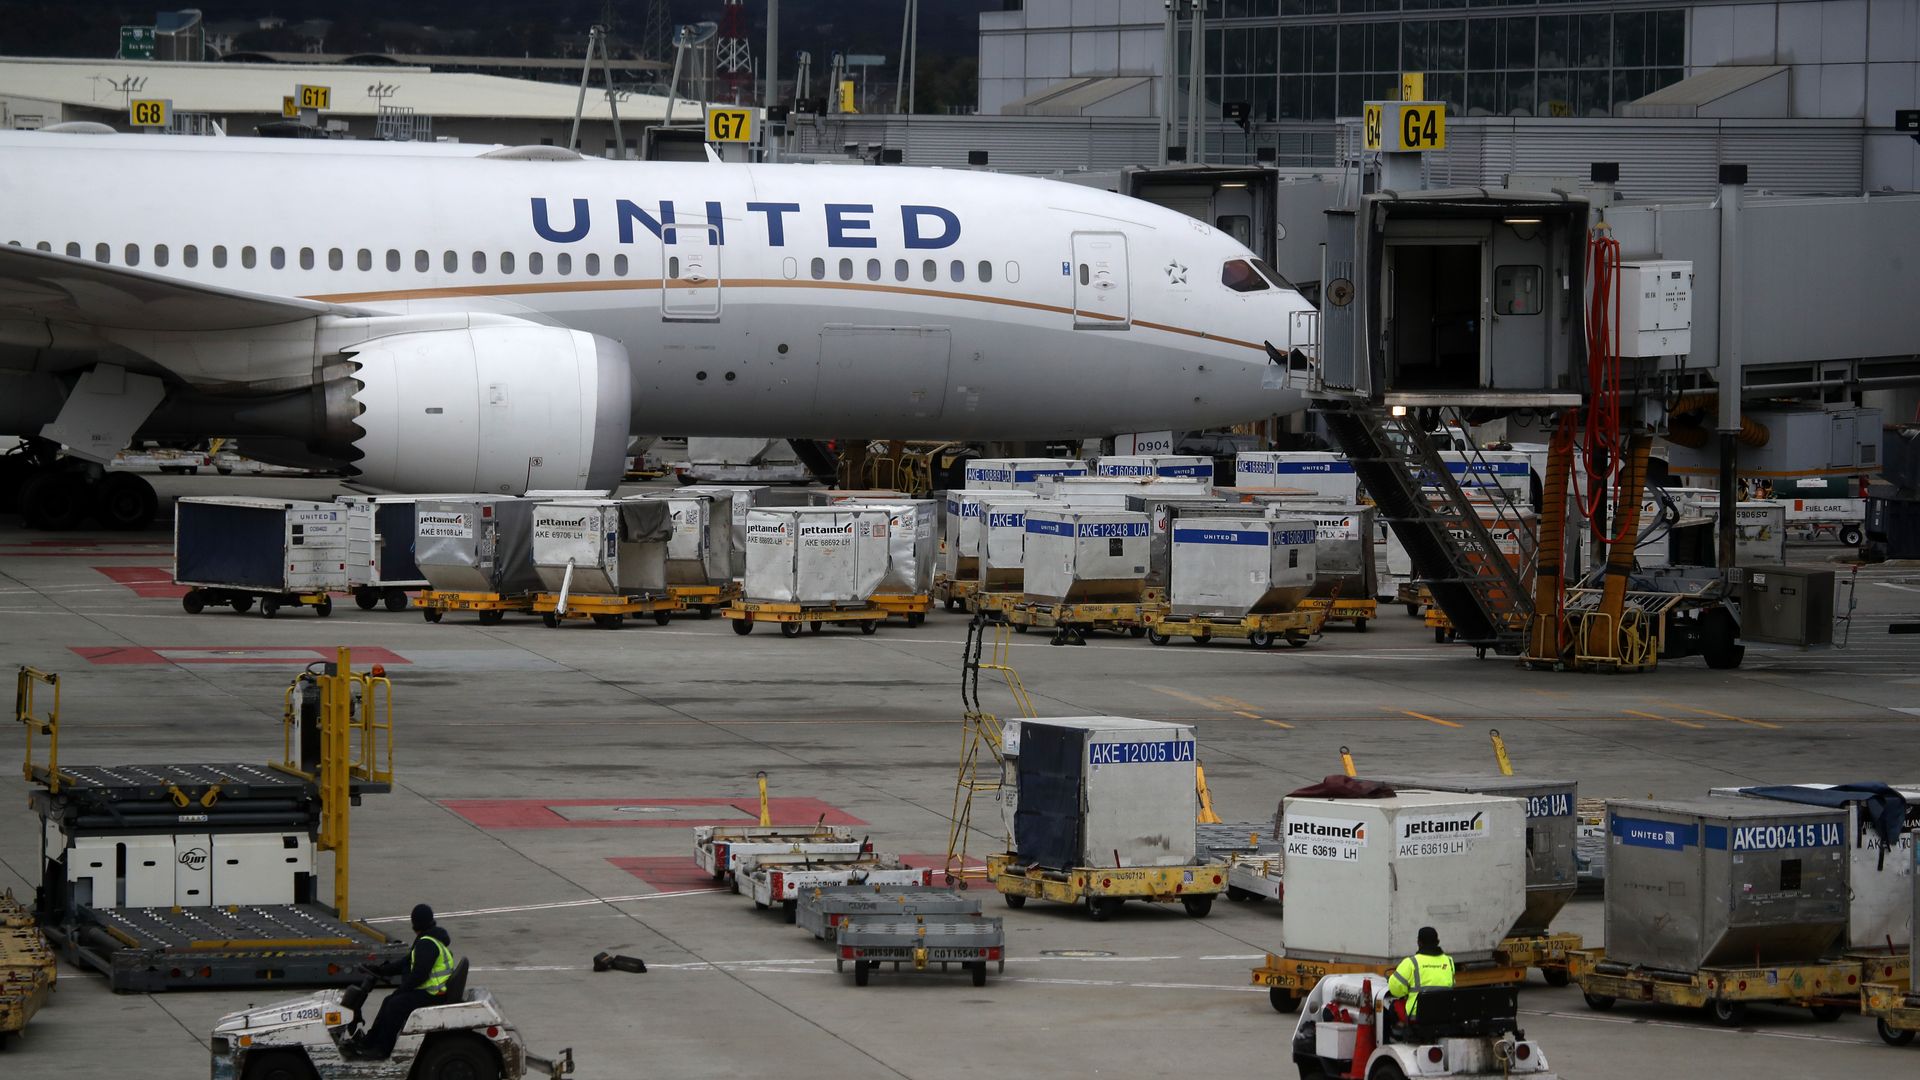 A United airplane sits at a gate surrounded by baggage carts